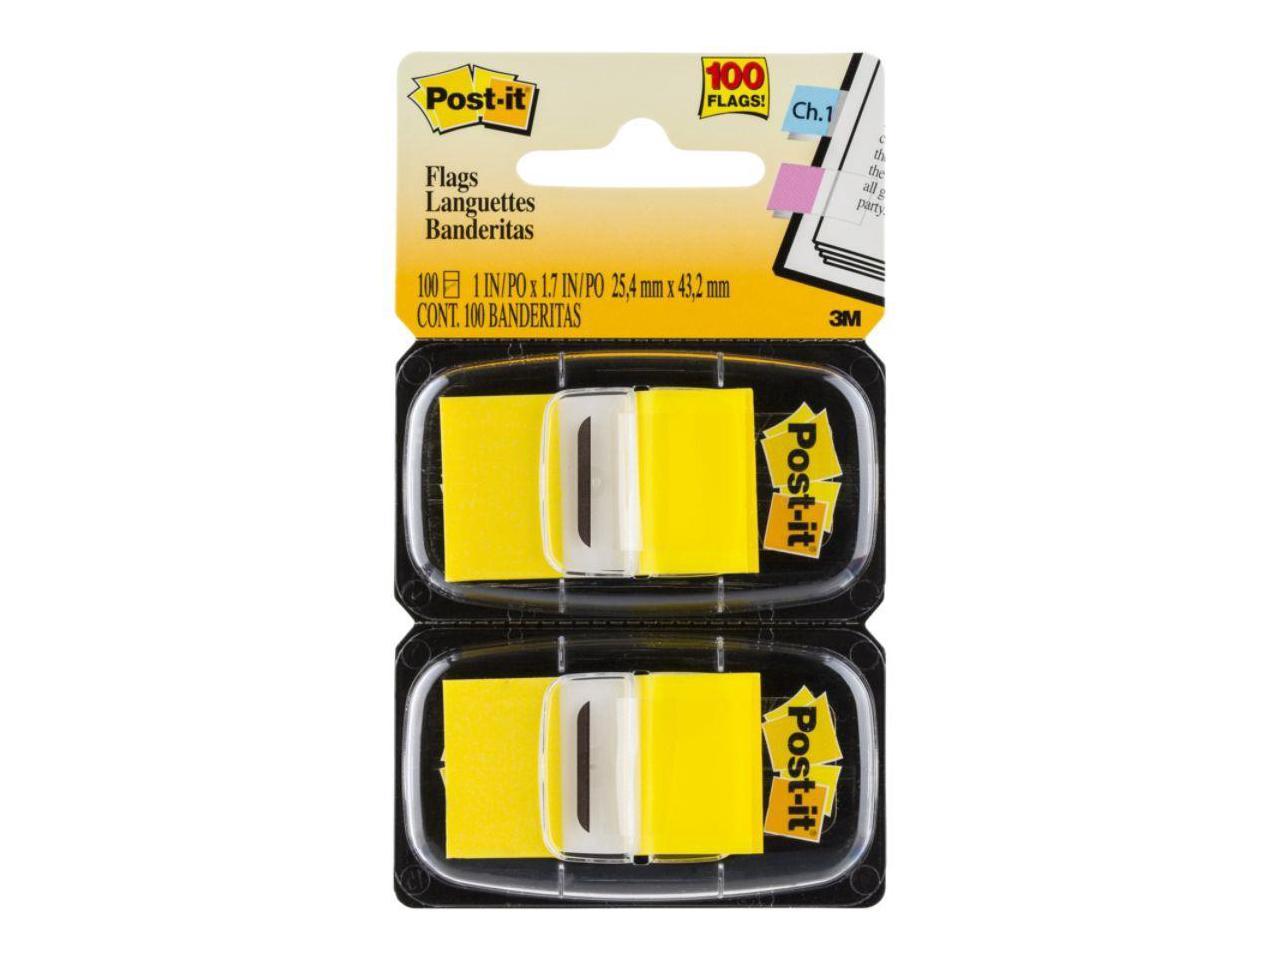 Post-it Flags Flag 1 in 2pk of 50 GN 680gn2 for sale online